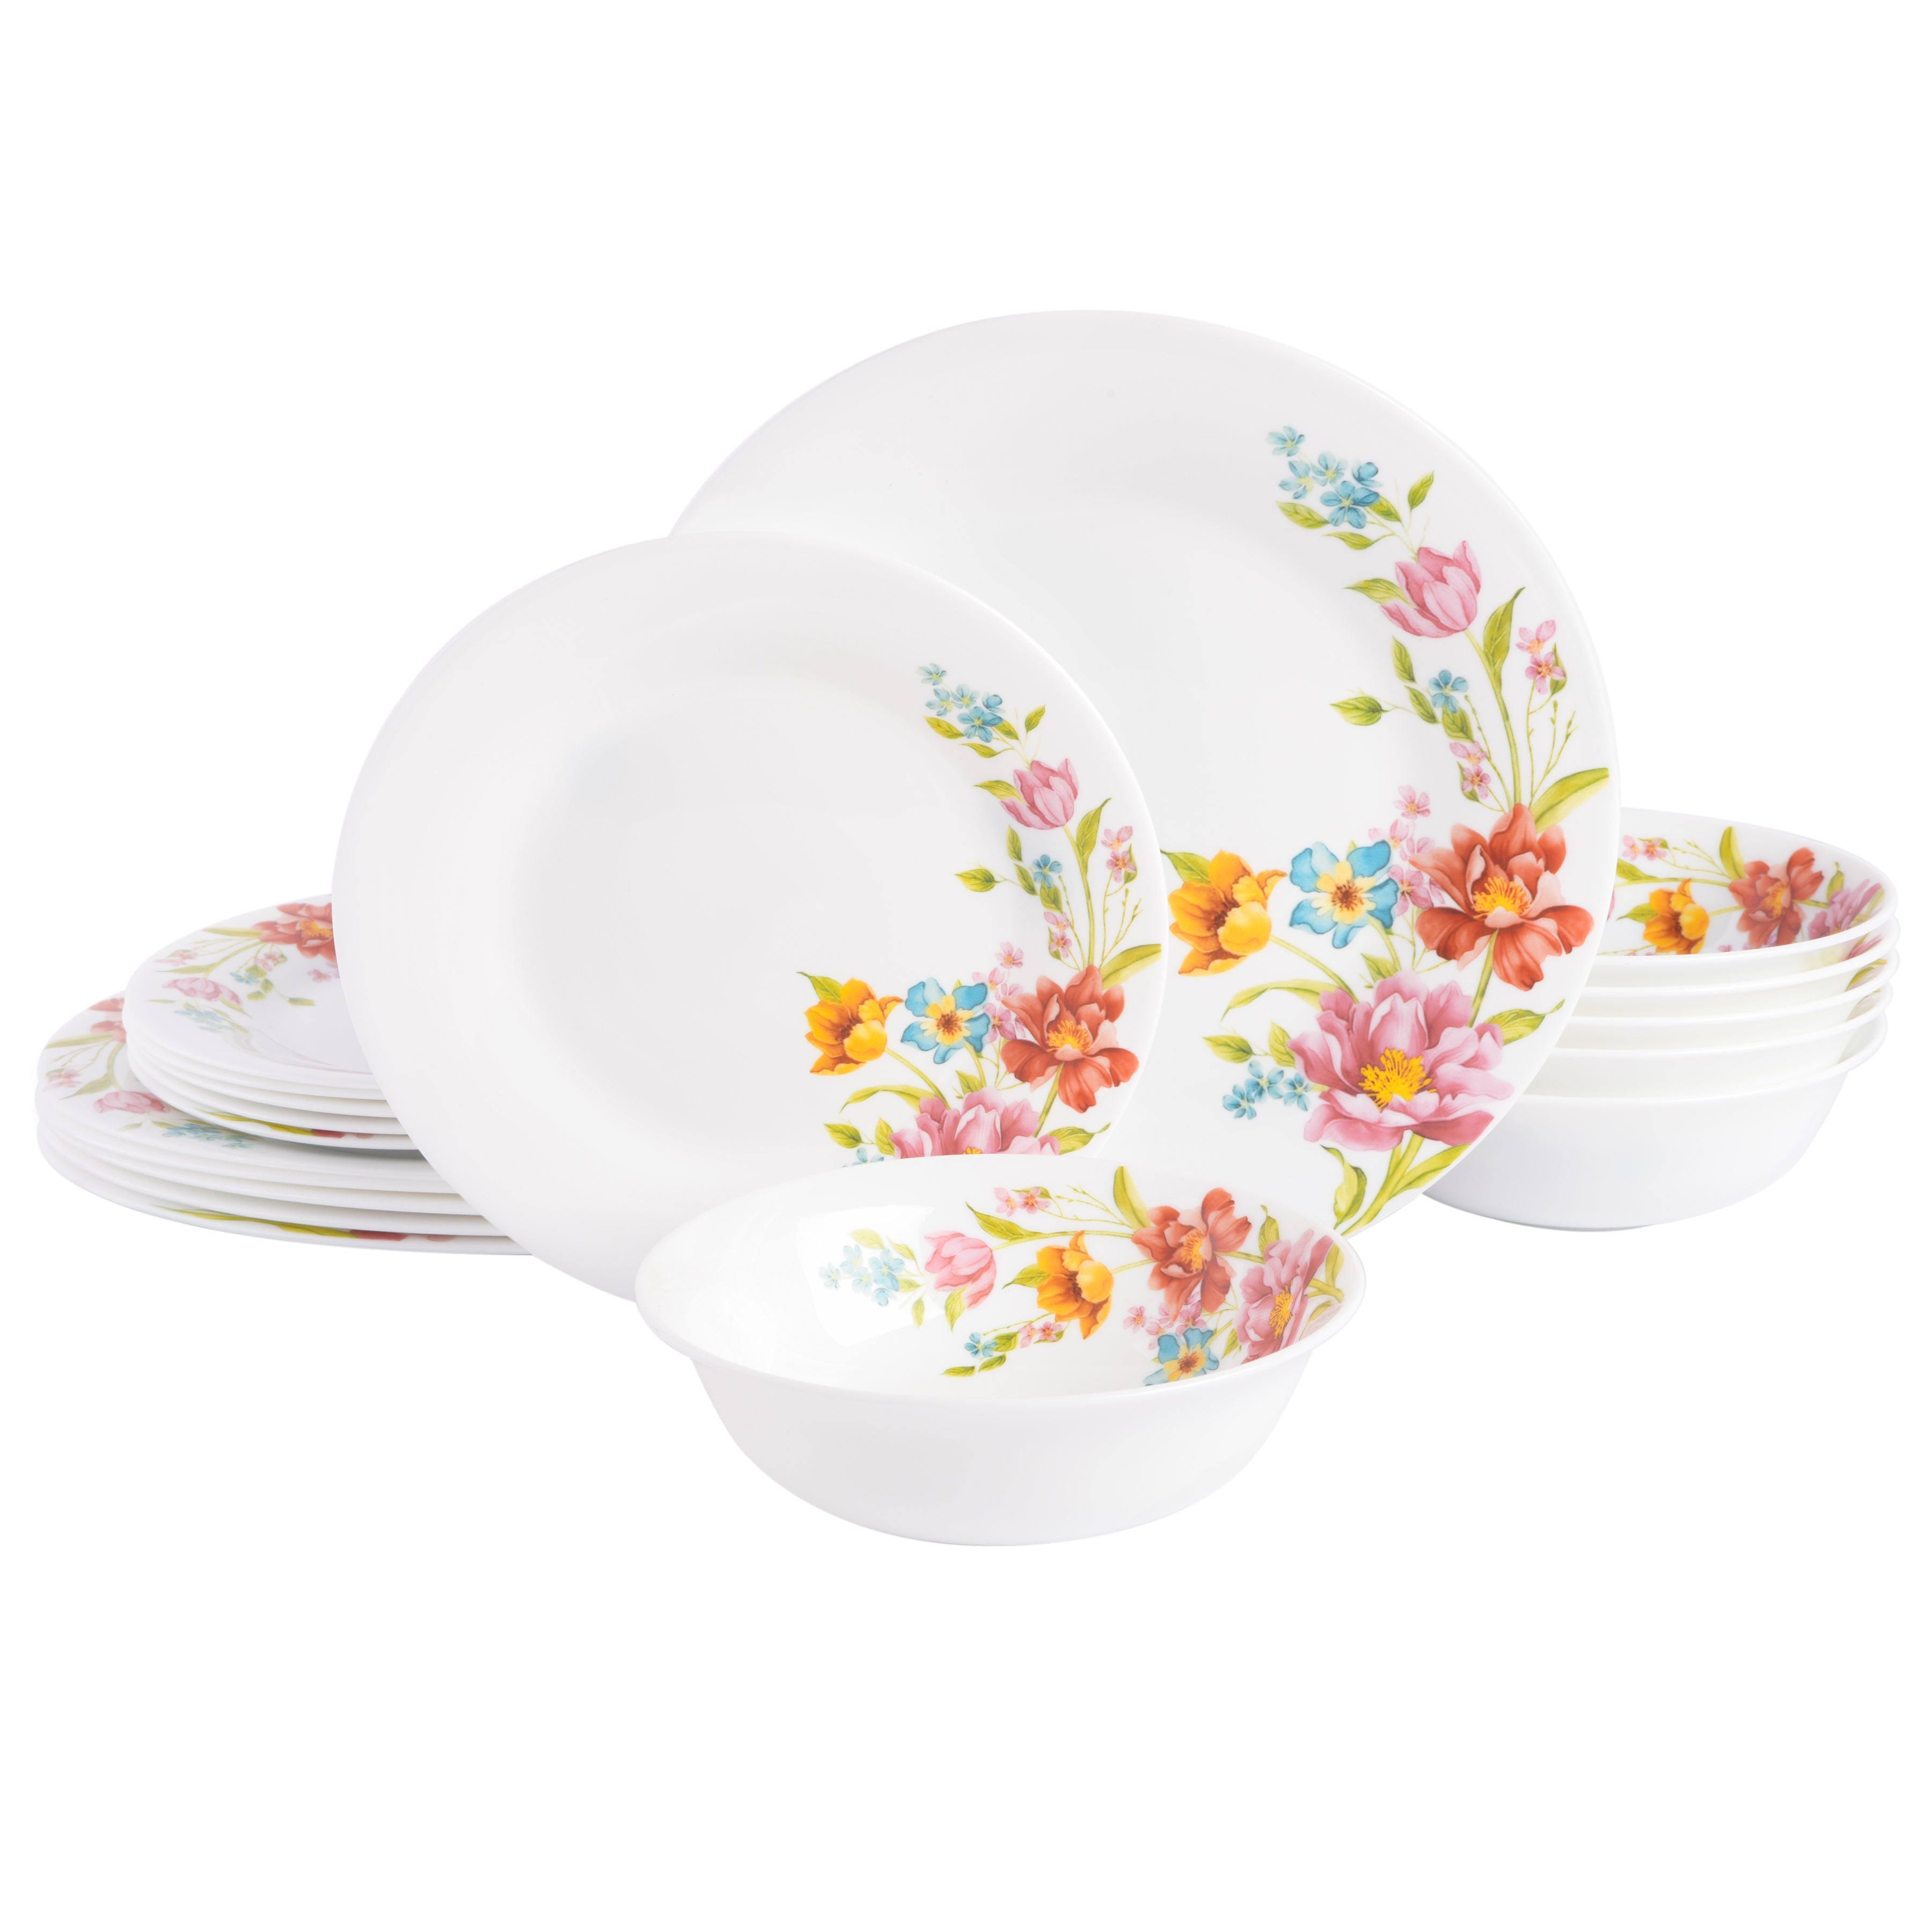 Opal Glass Dinnerware Set with Floral Patterns | Image